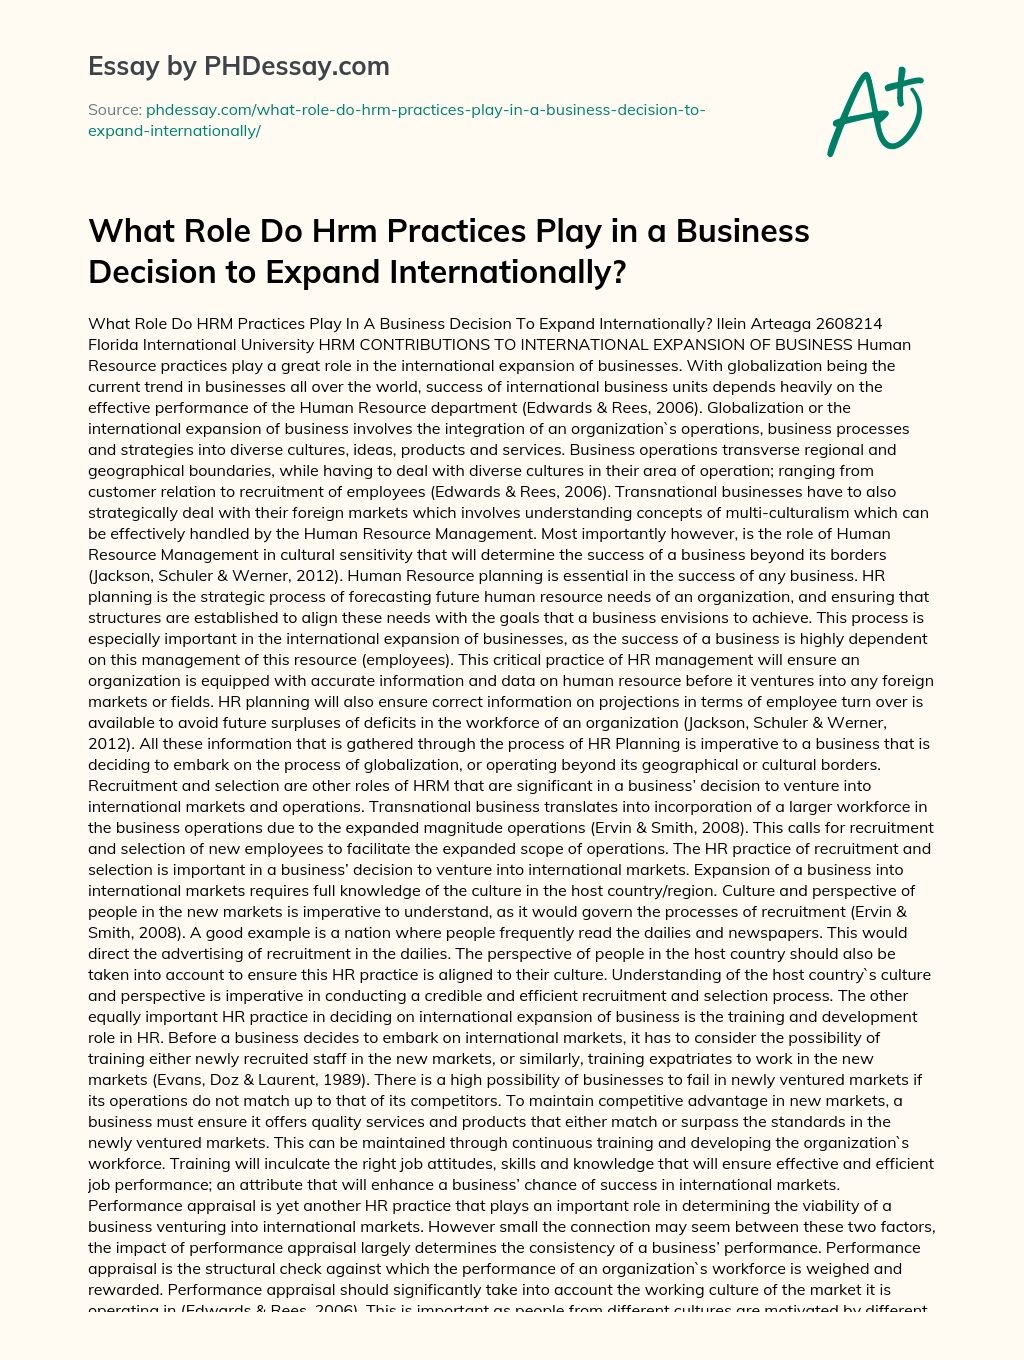 What Role Do Hrm Practices Play in a Business Decision to Expand Internationally? essay